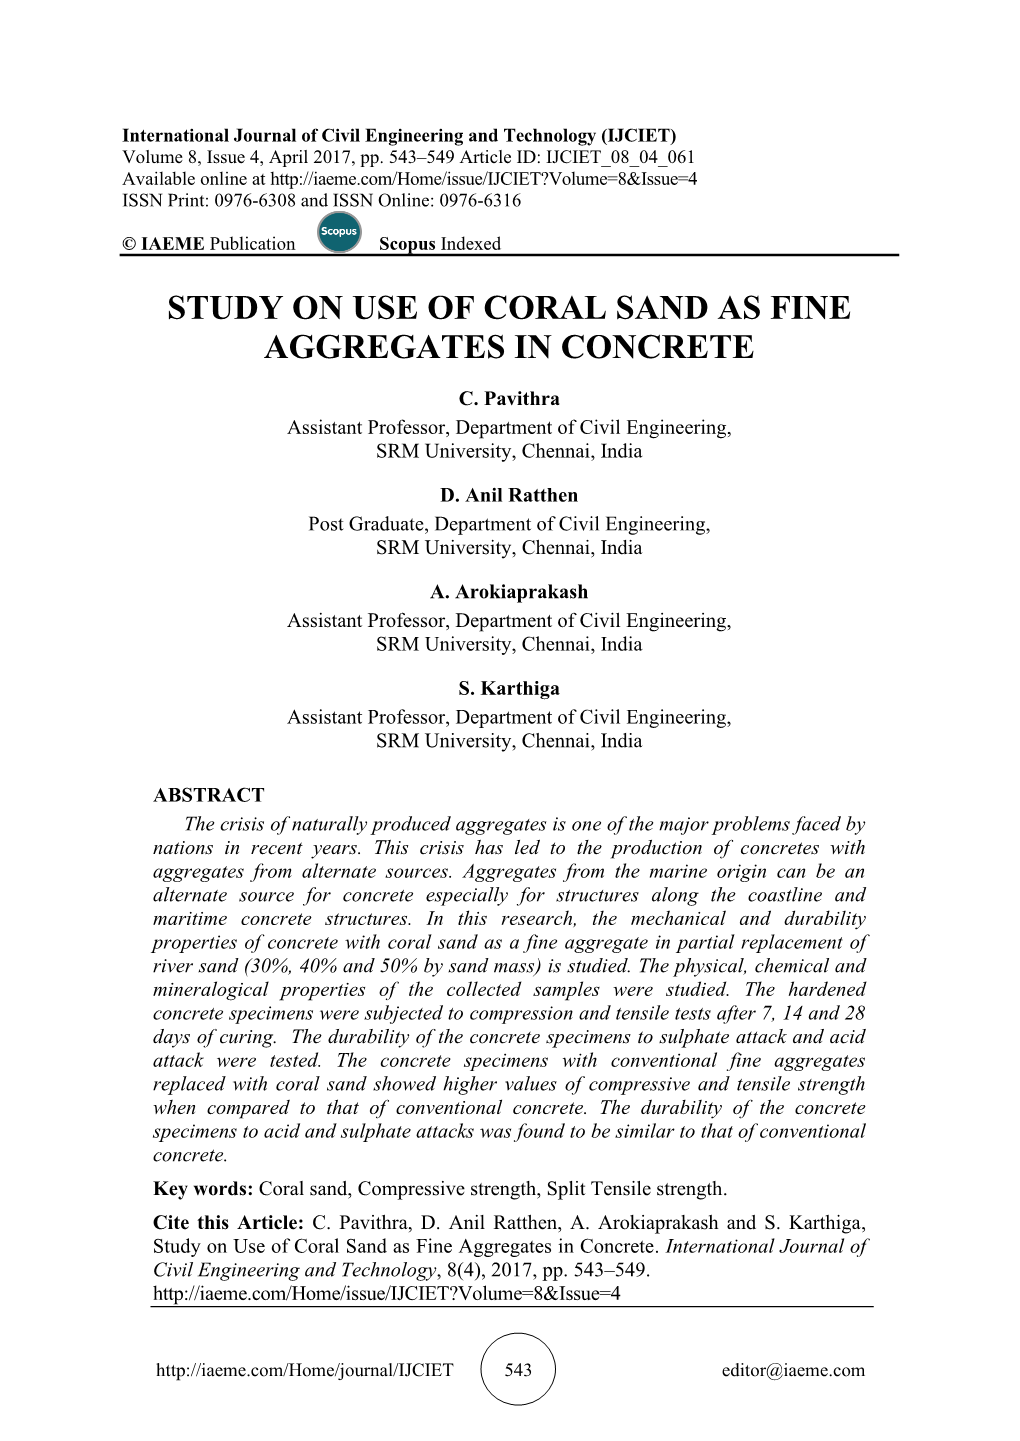 Study on Use of Coral Sand As Fine Aggregates in Concrete